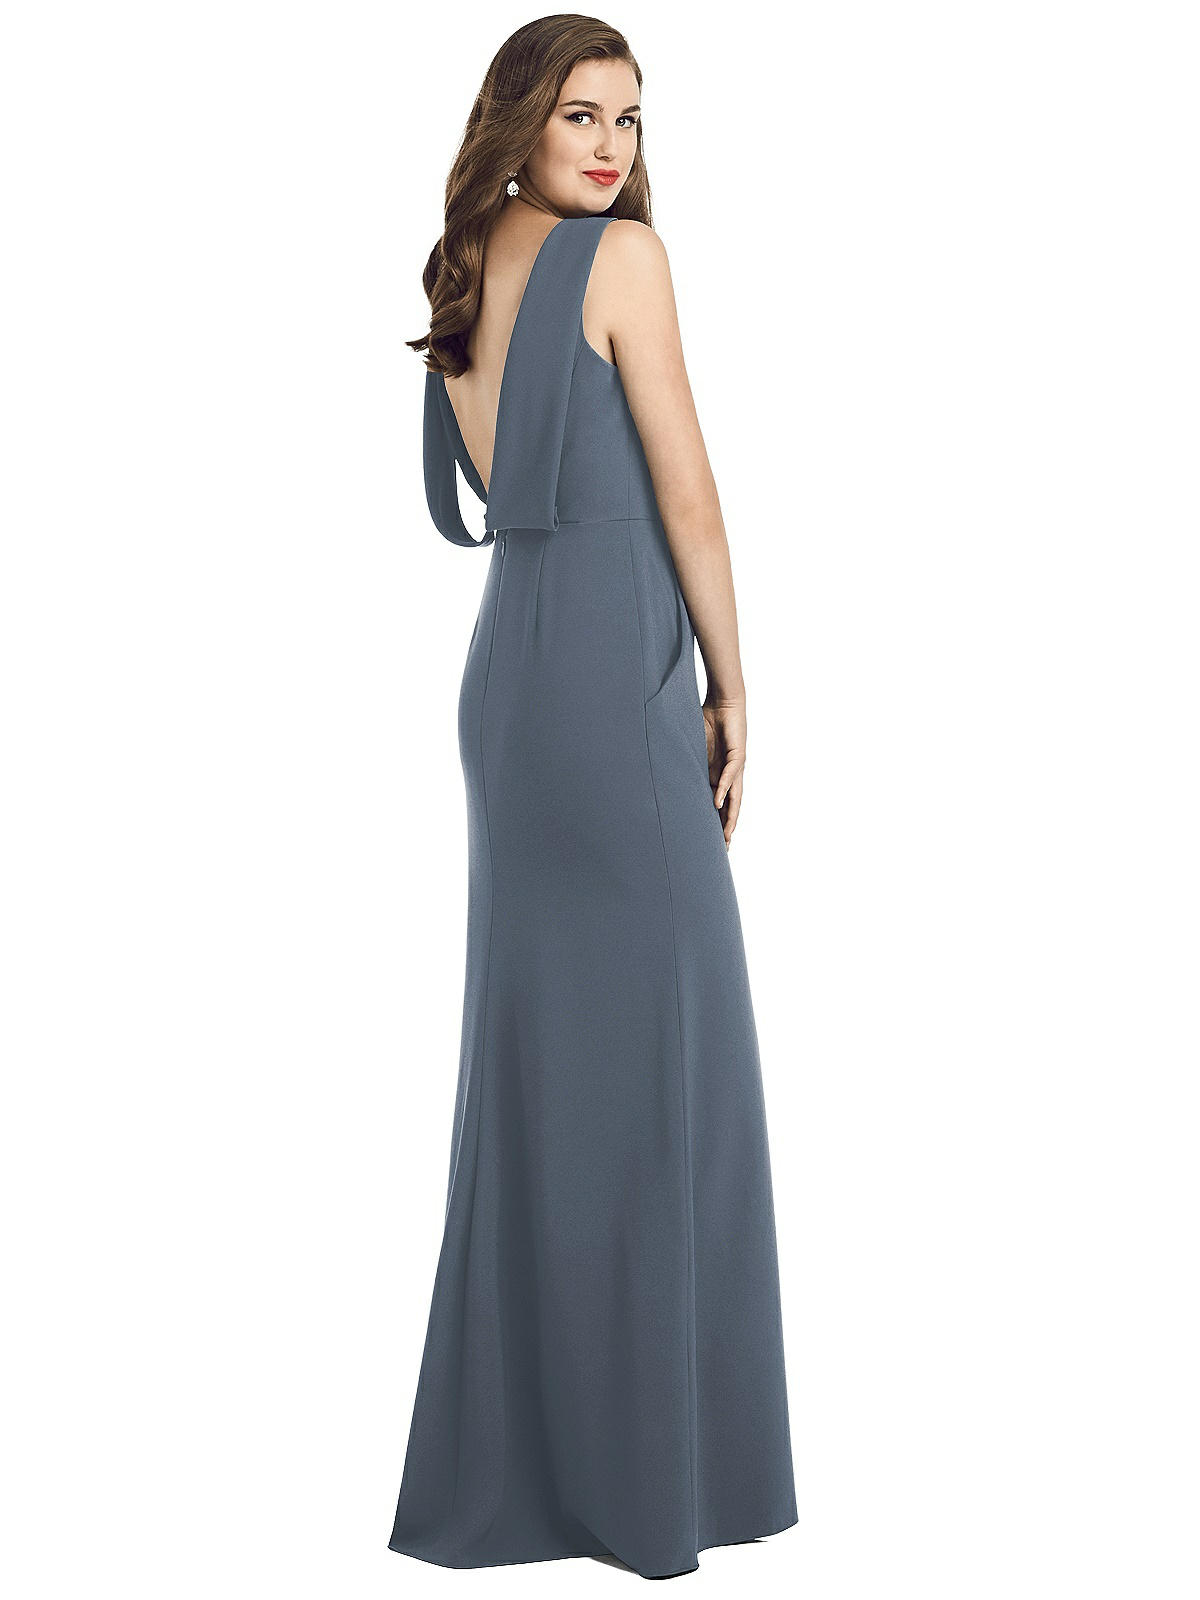 Draped Backless Crepe Dress with Pockets | The Dessy Group